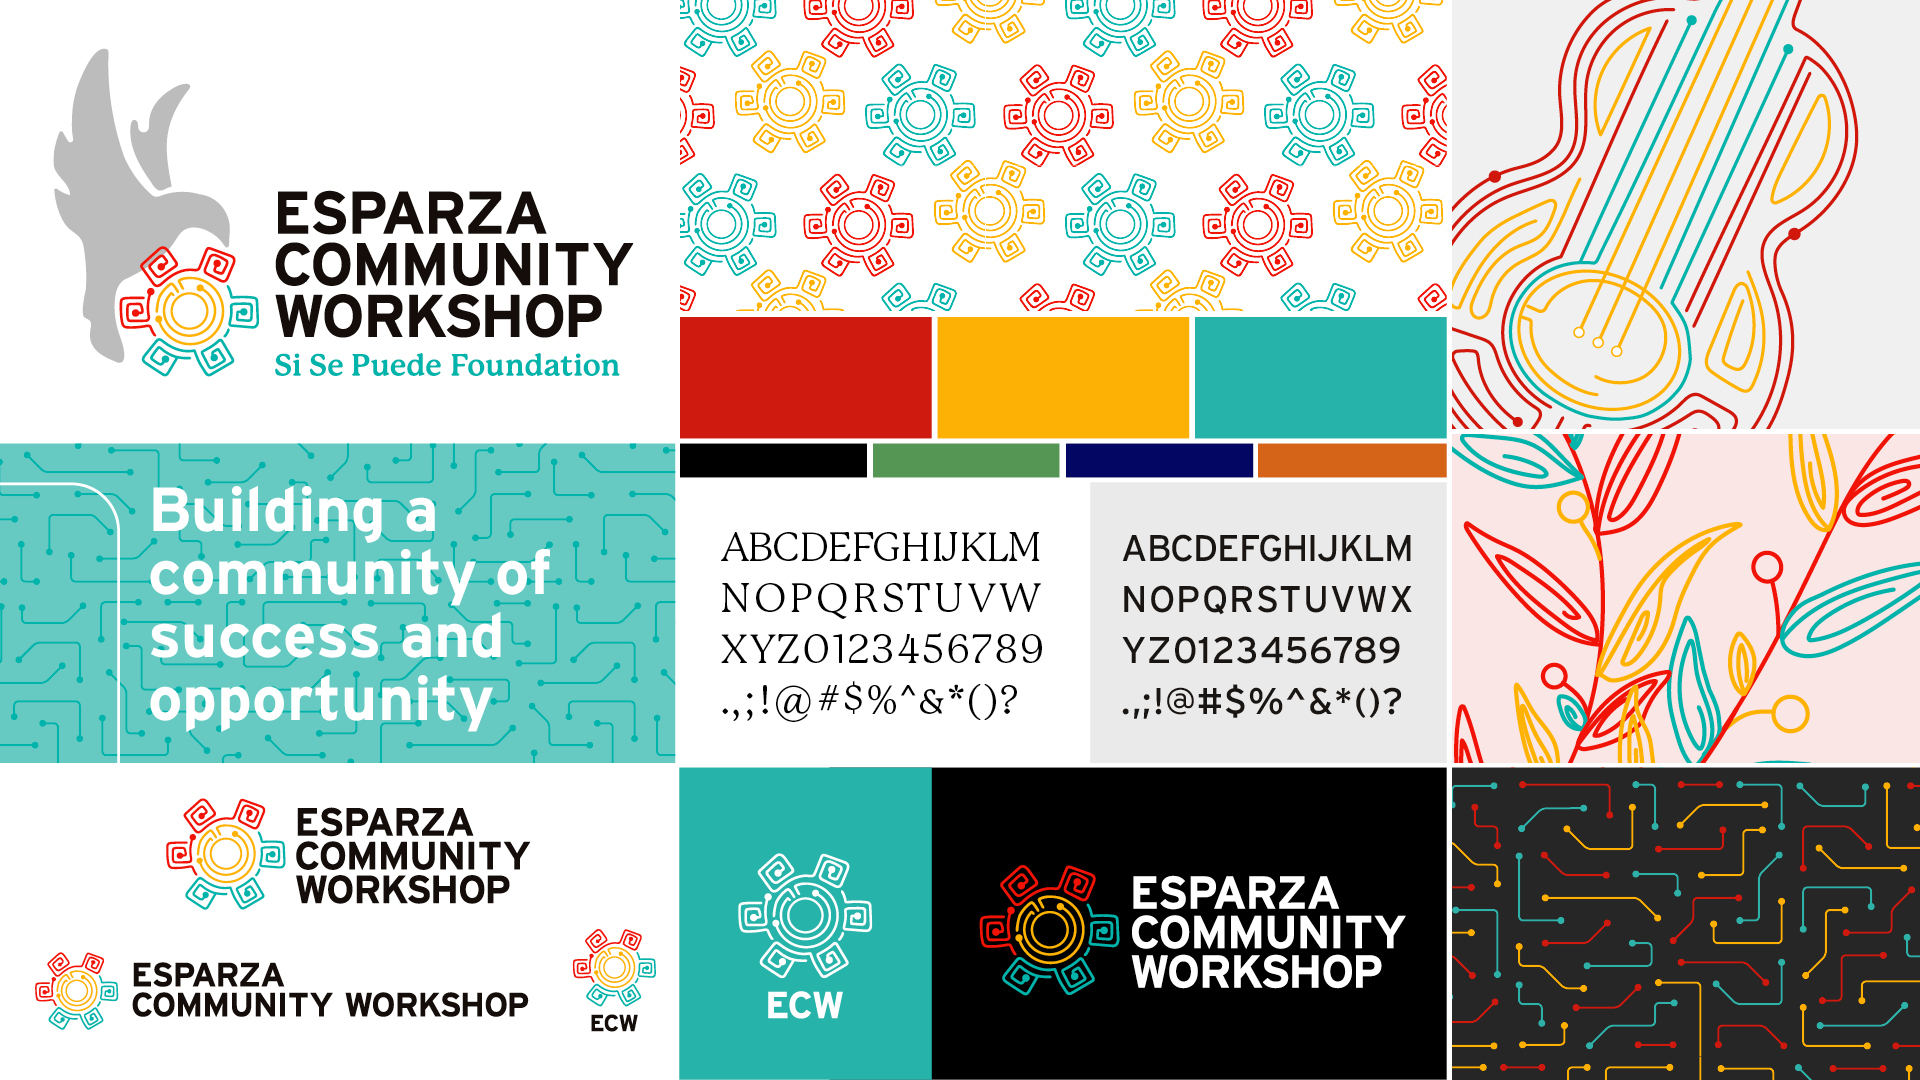 featured image two:Esparza Community Workshop Brand Identity & Website